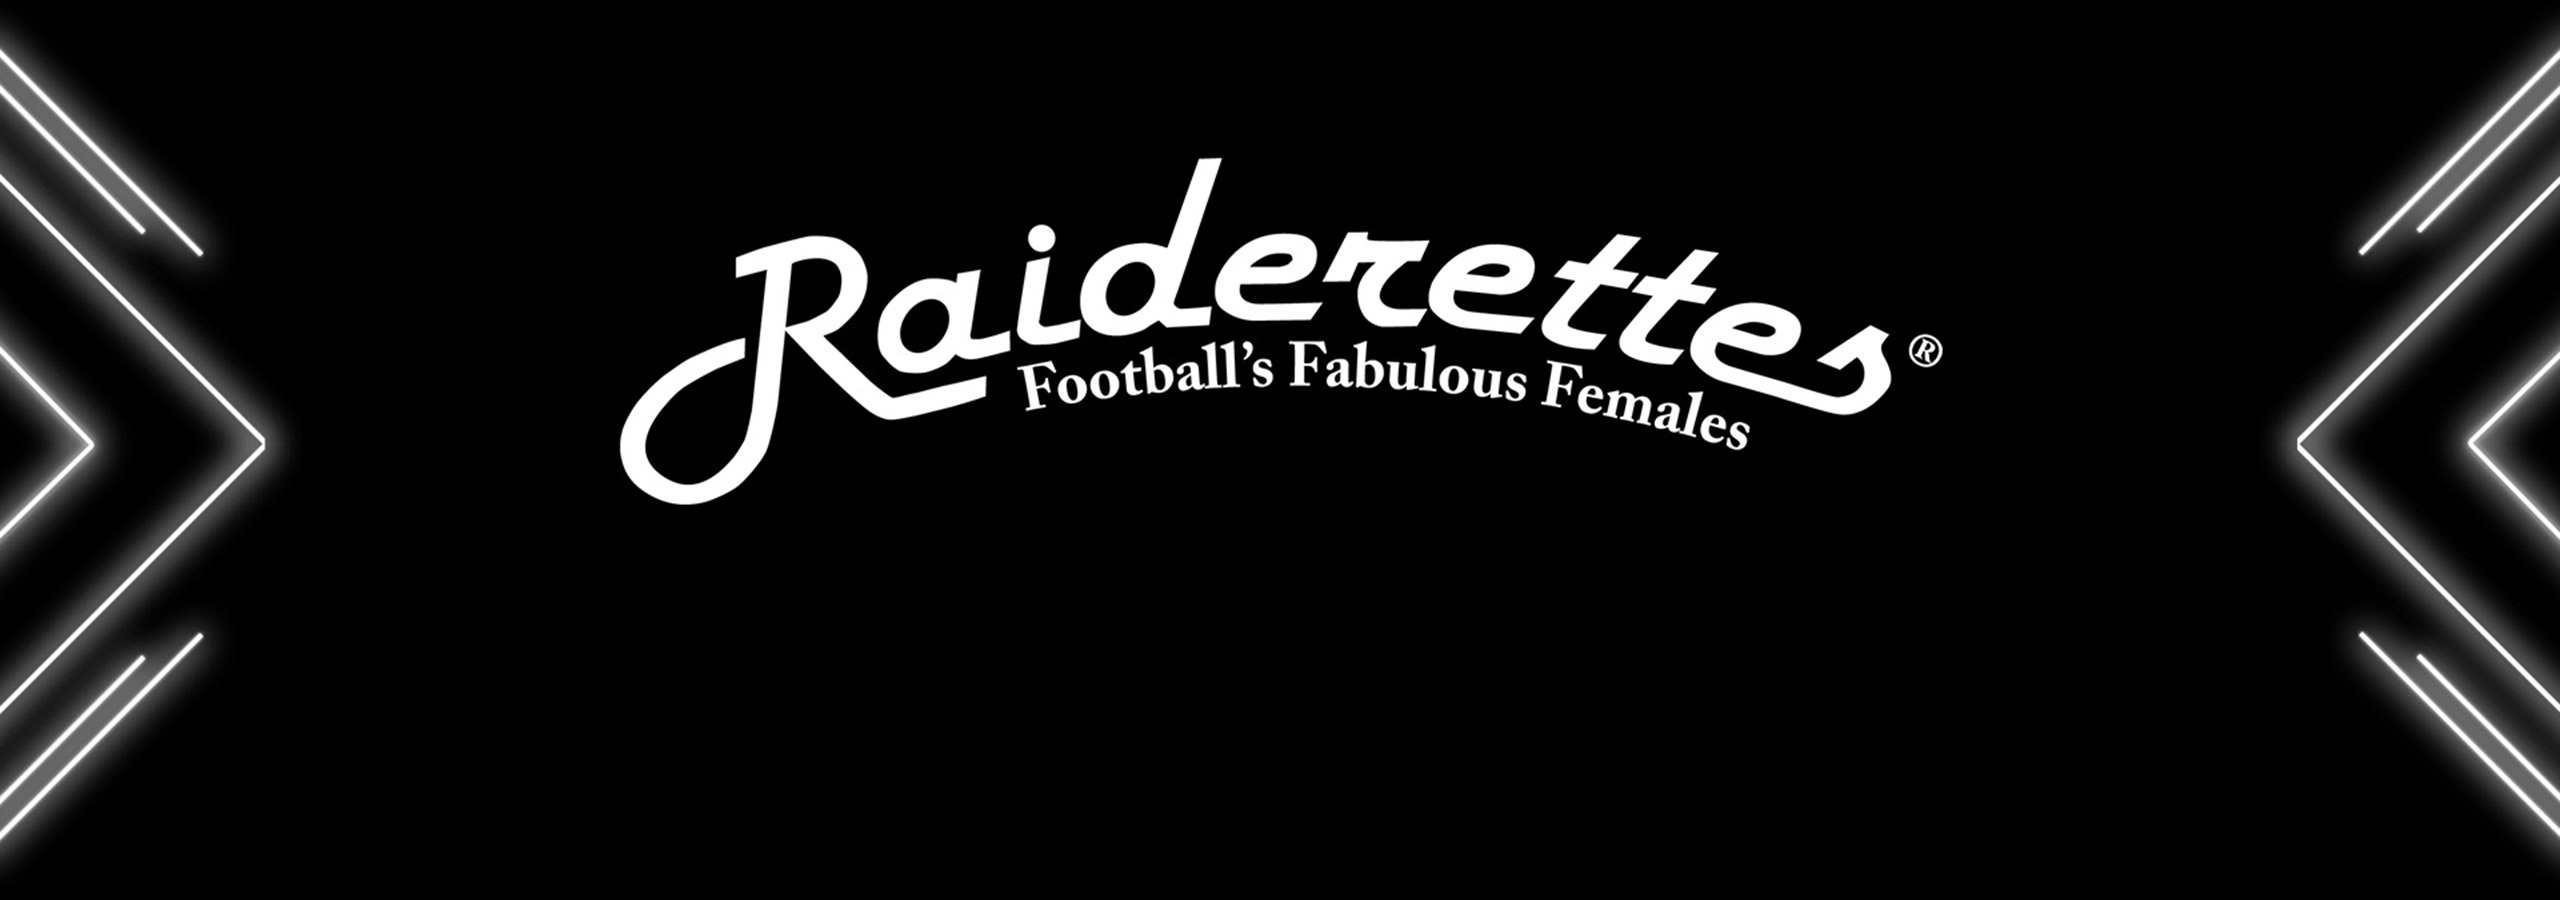 Auditions take place once a year between the months of April and July. Please sign up to receive information on the 2022 Raiderettes auditions when it becomes available.